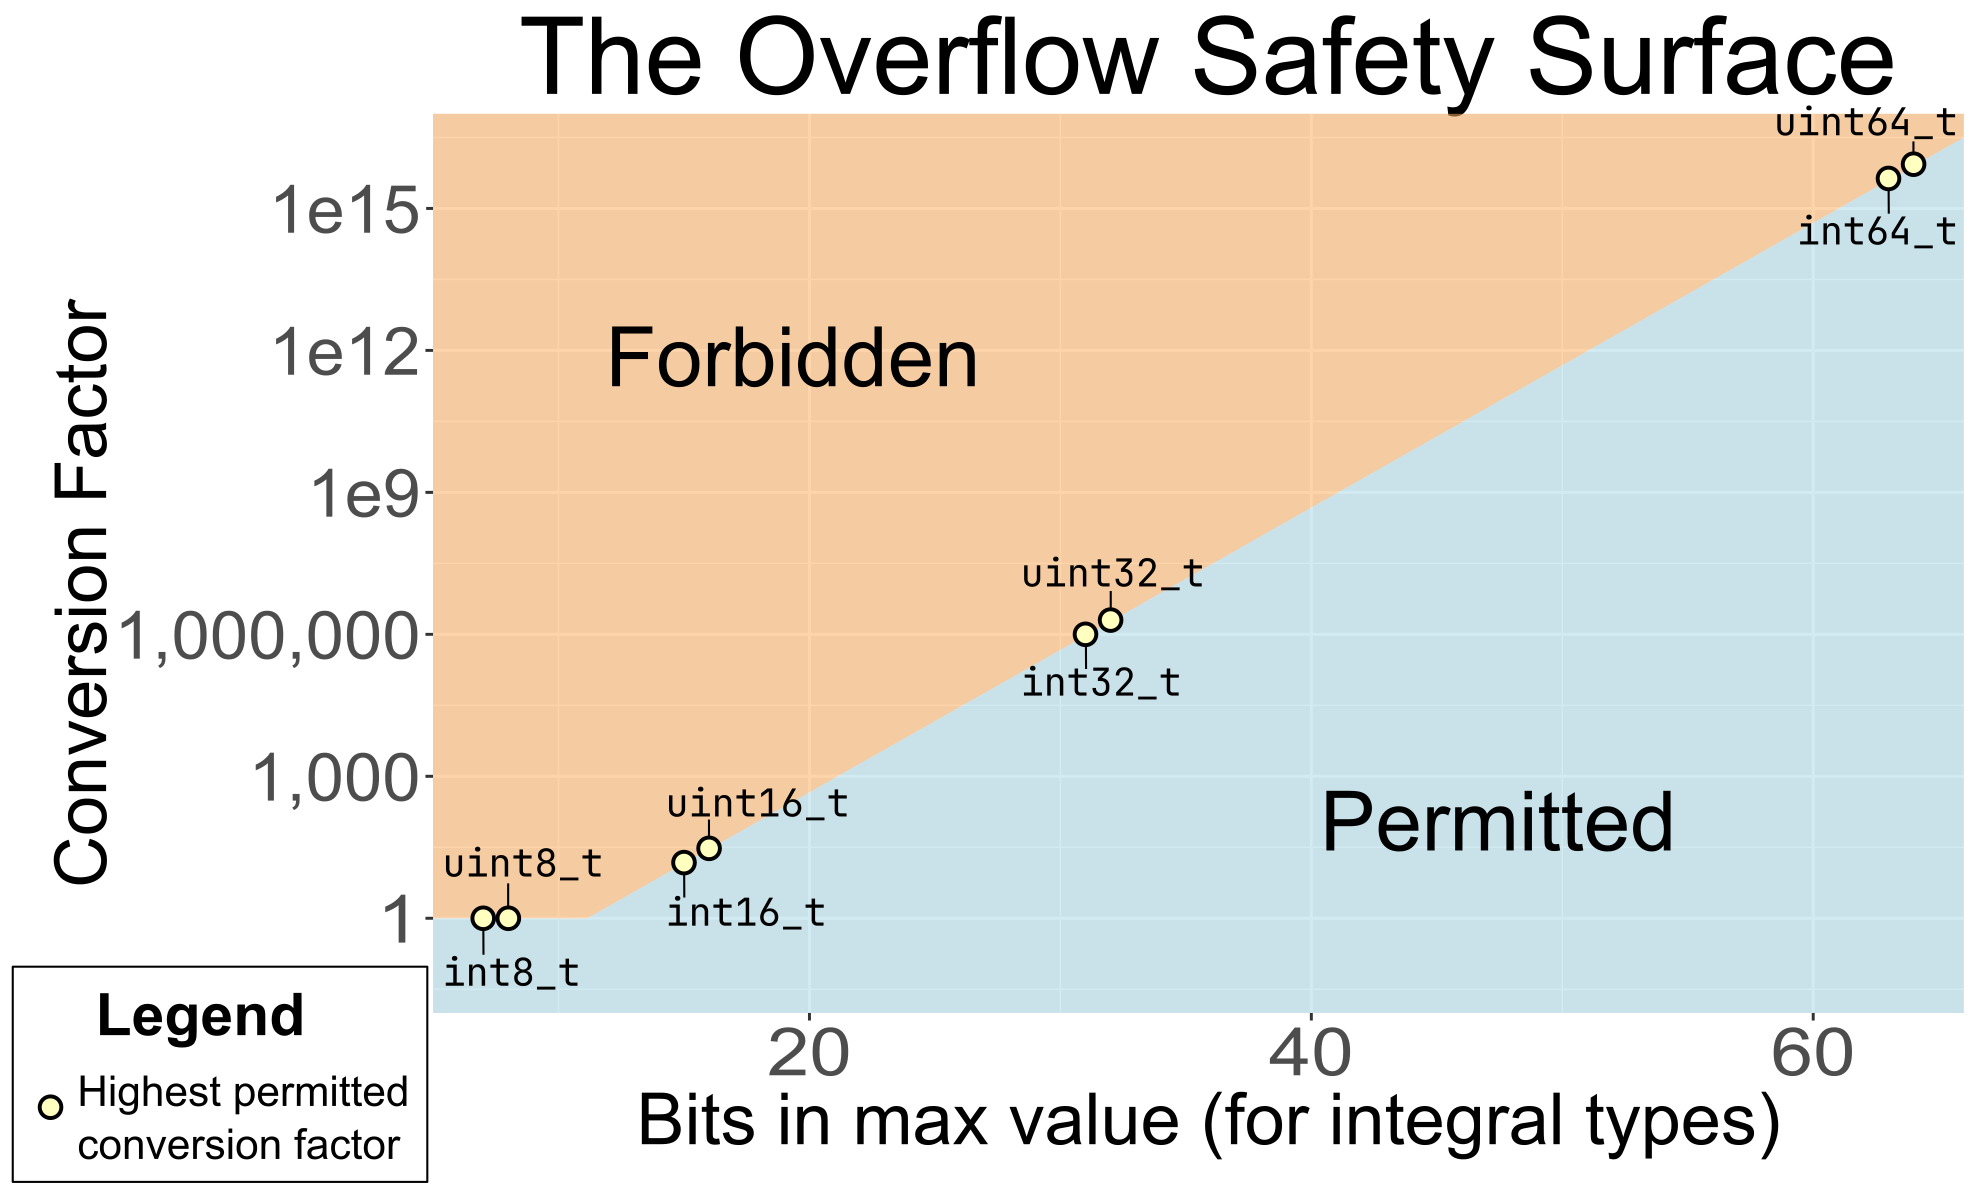 The overflow safety surface